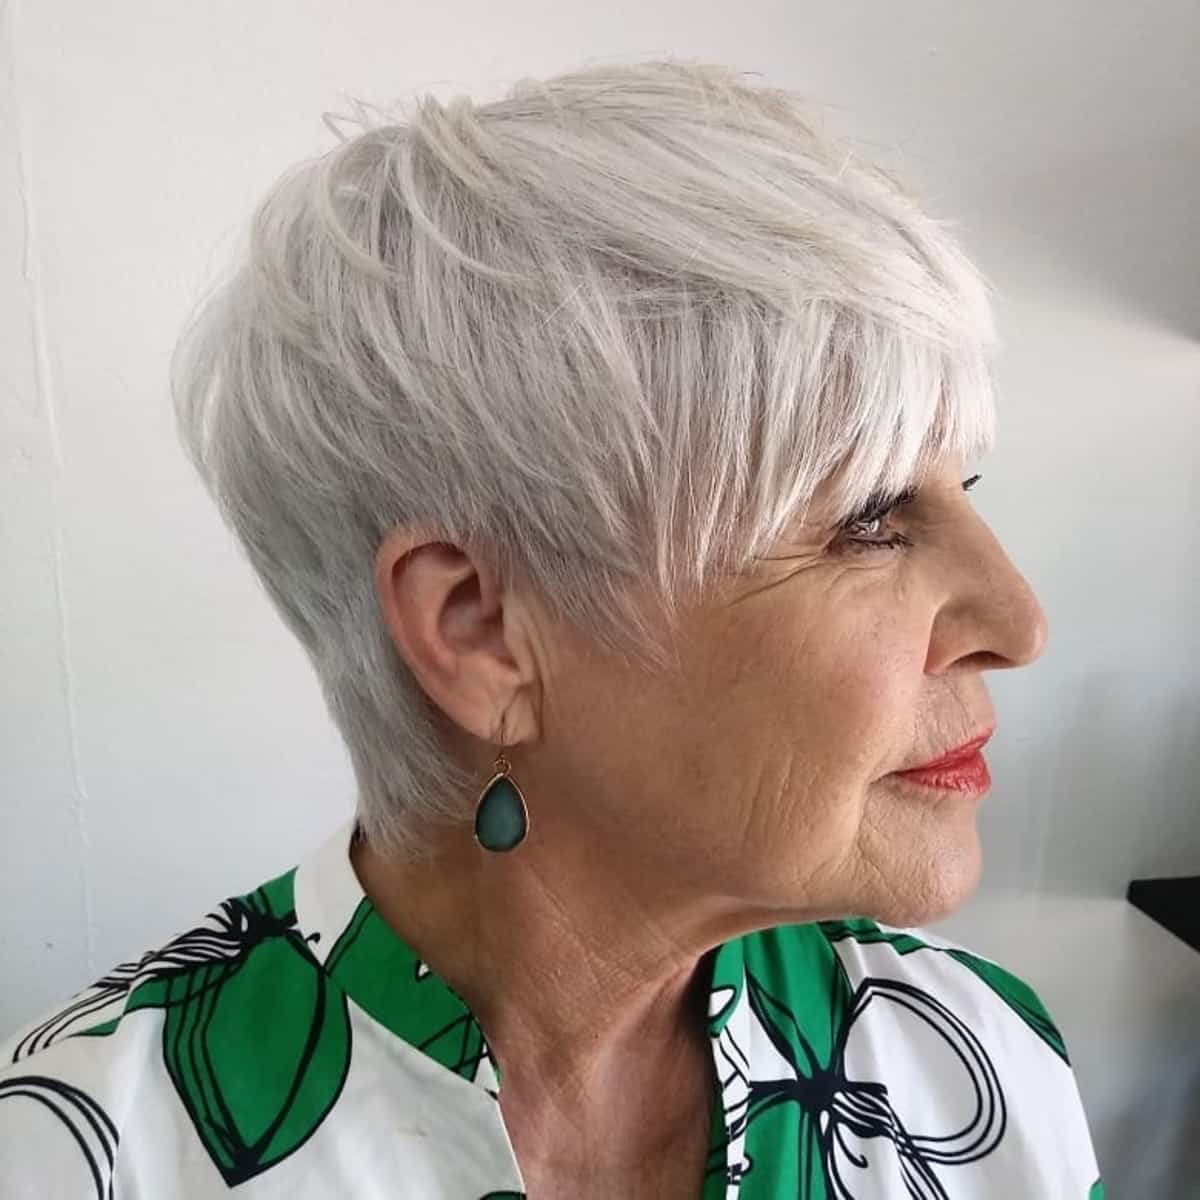 15 Best Pixie Haircuts For Women Over 60 2021 Trends